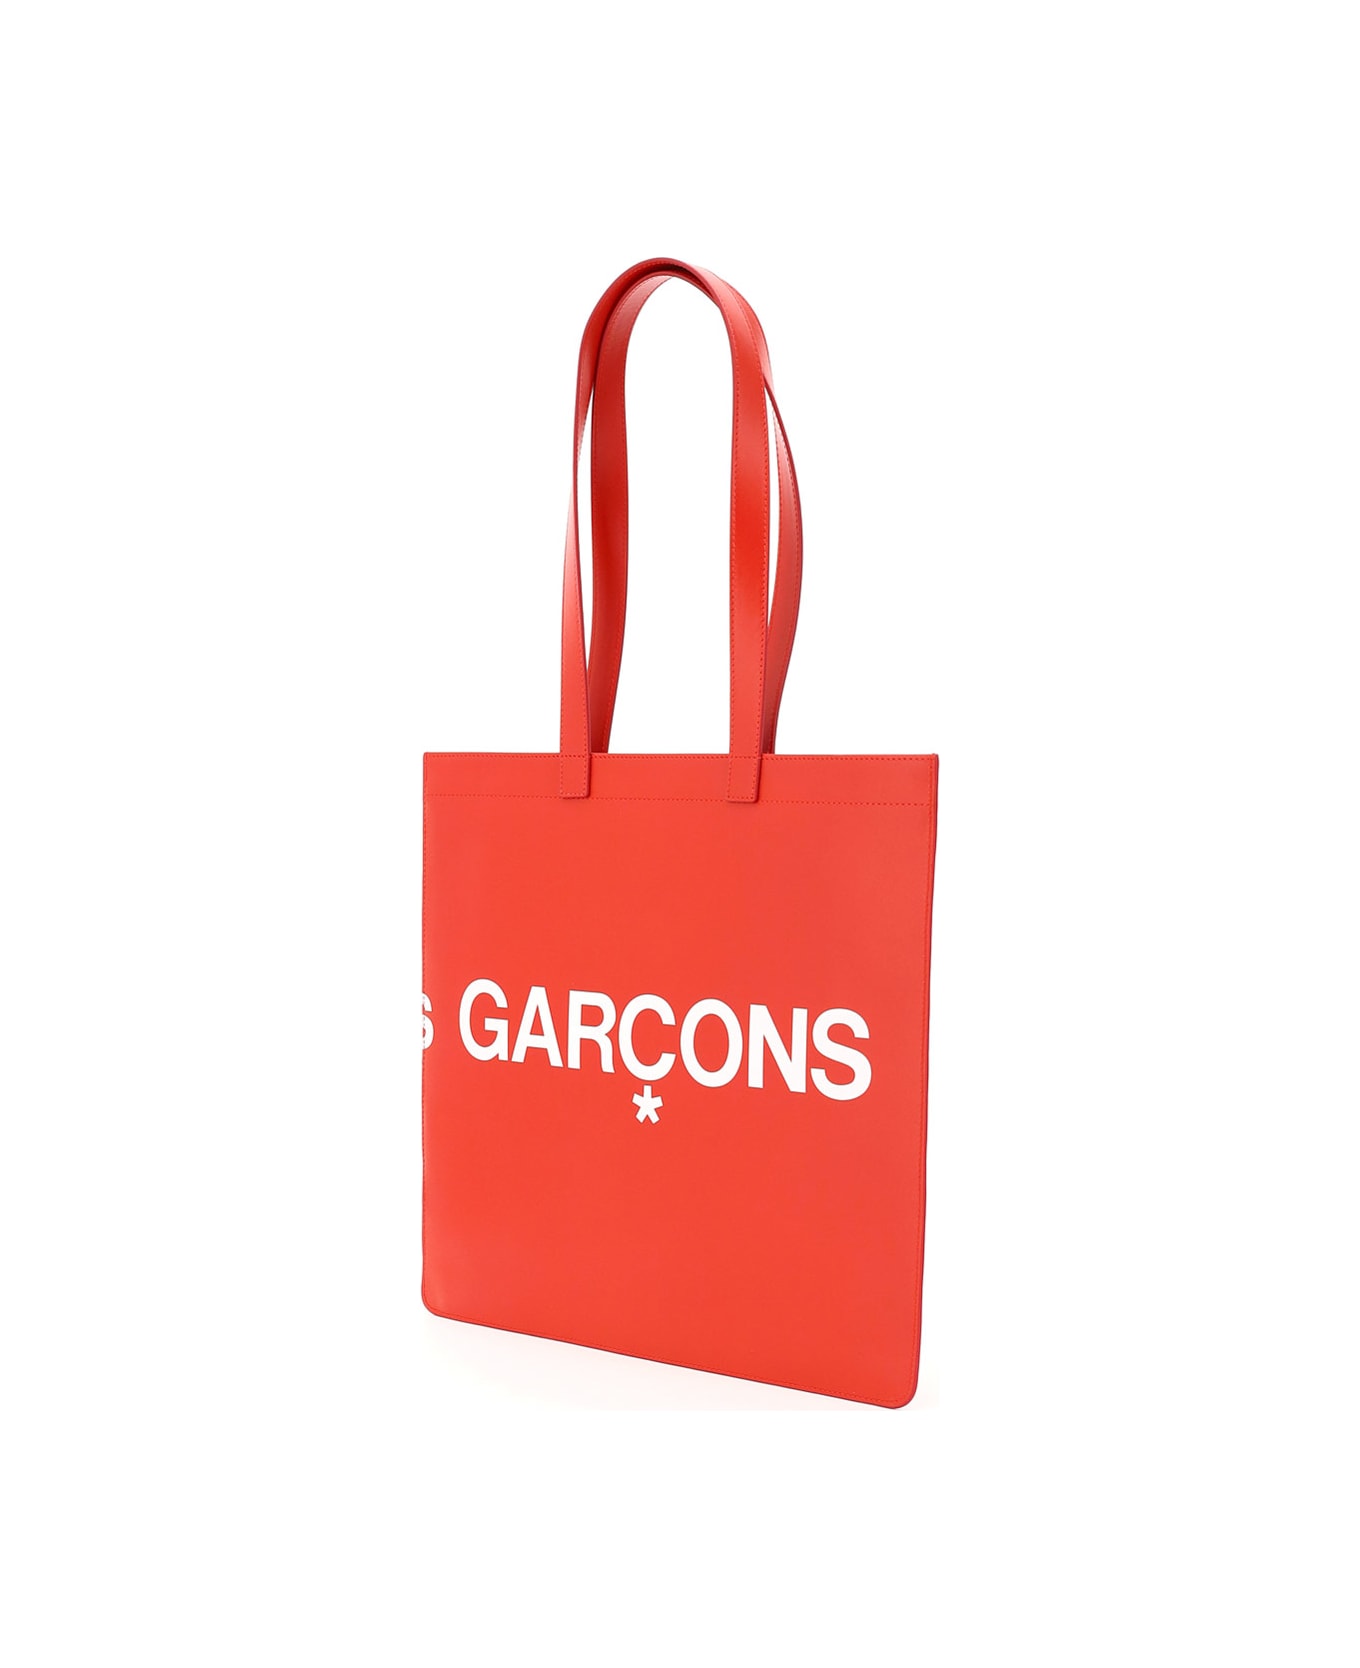 Comme des Garçons Wallet Leather Tote Bag With Logo - RED (Red)